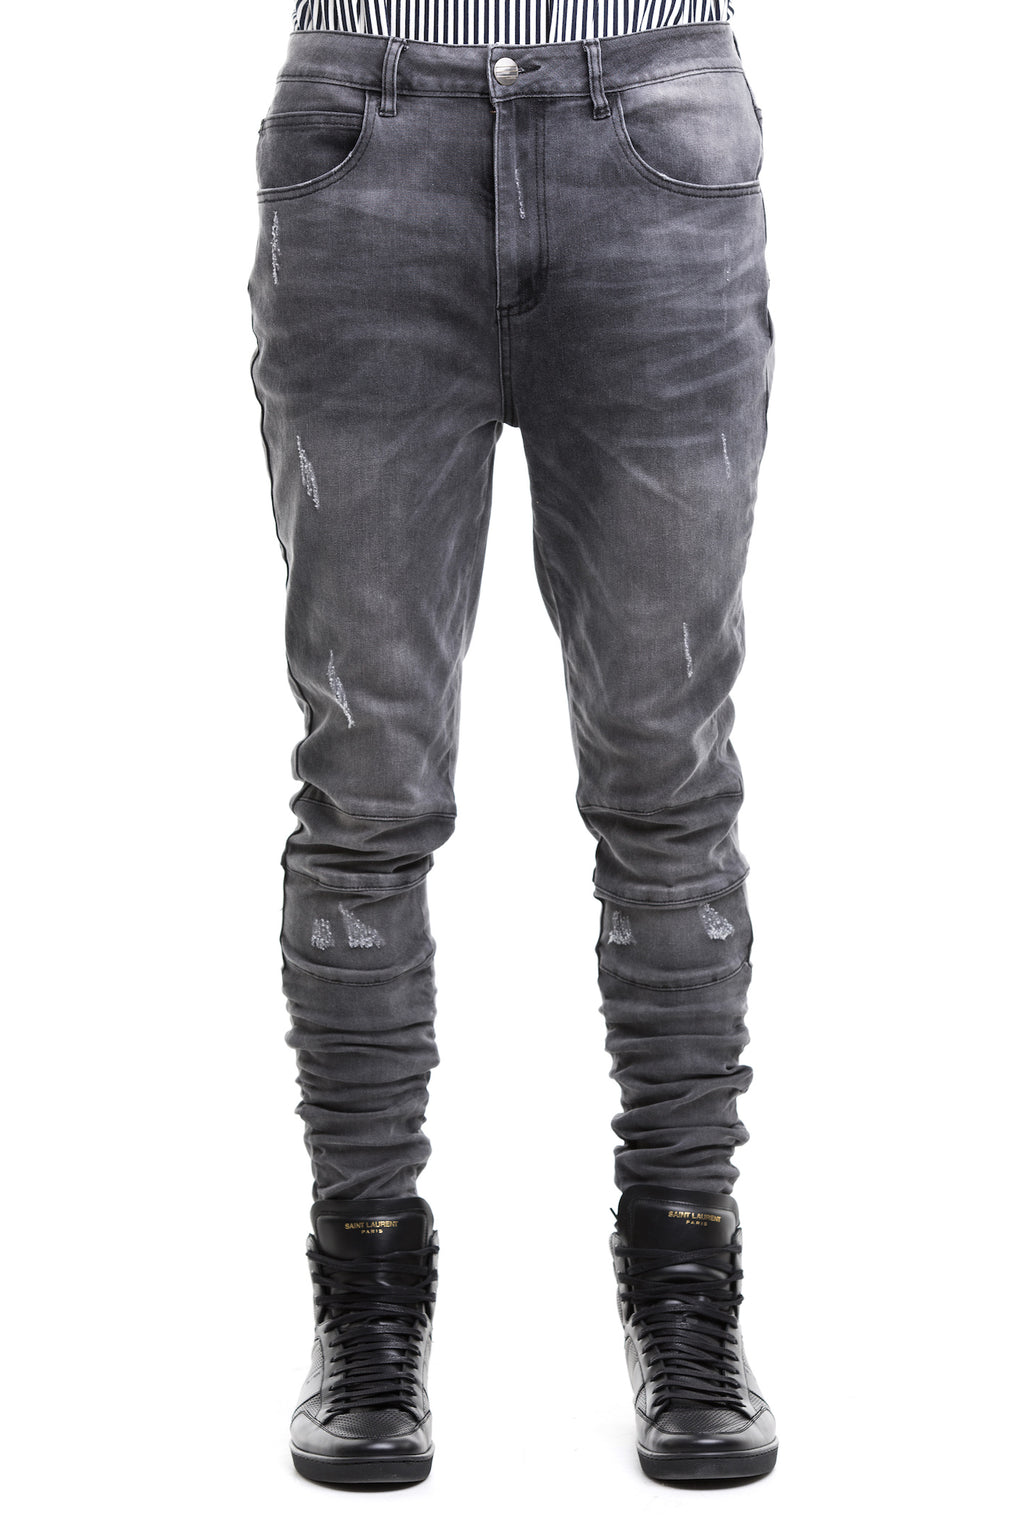 The “Ridge” Jean In Black Color - Front View